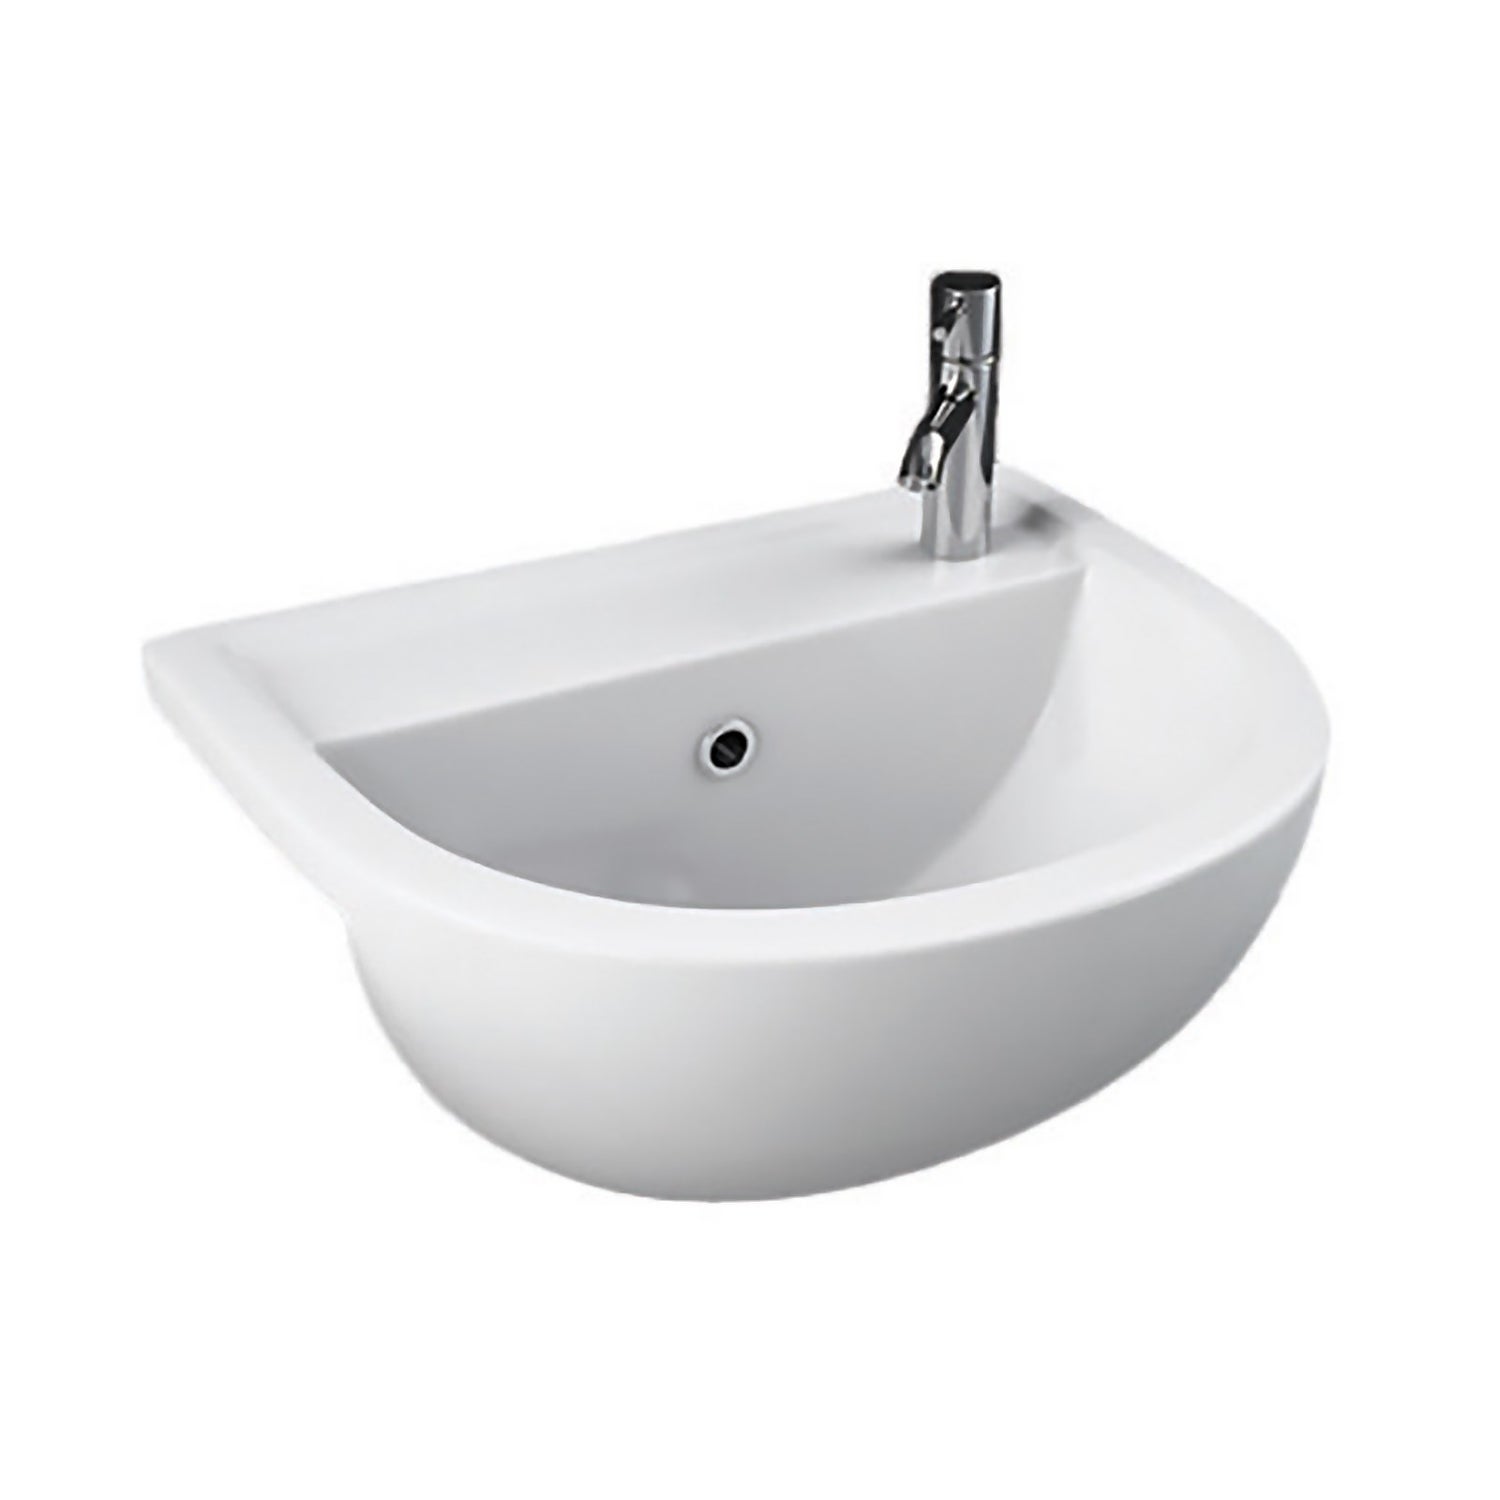 Cedar White Semi Recessed Basin with 1 Tap Hole - 400mm